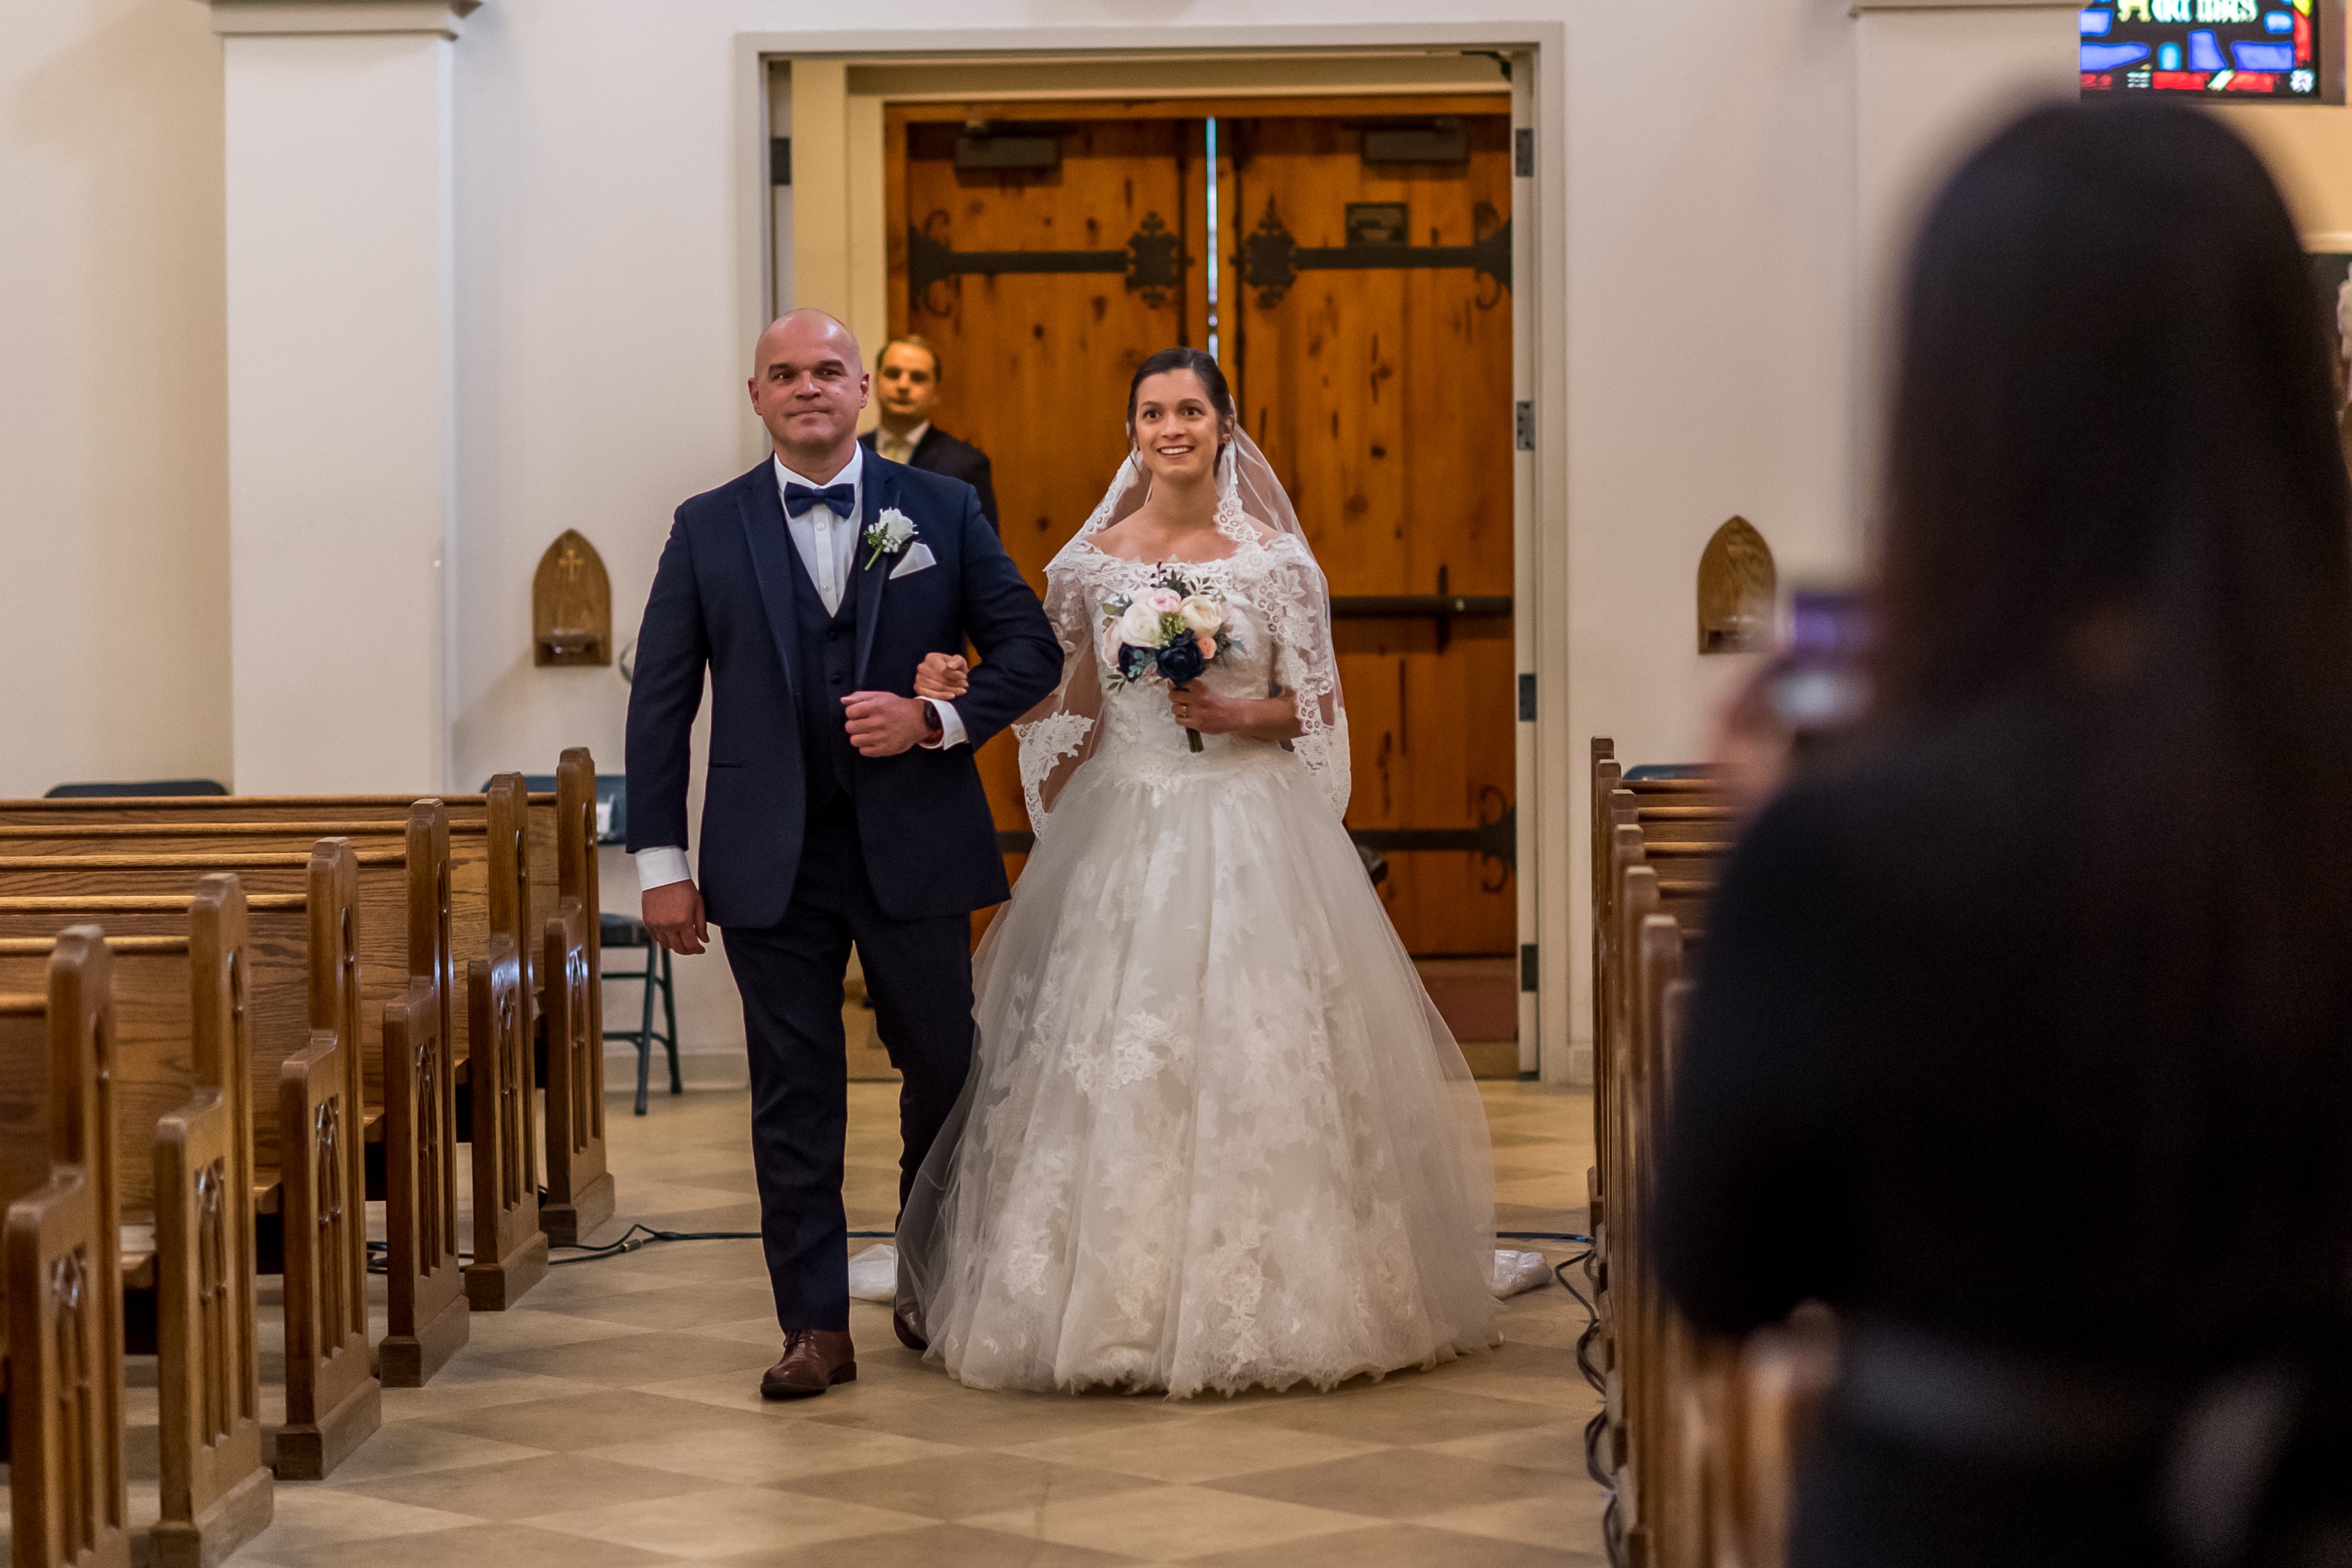 Bride walks down the aisle of her wedding at Our Lady of Mt. Carmel in Littleton, Colorado.